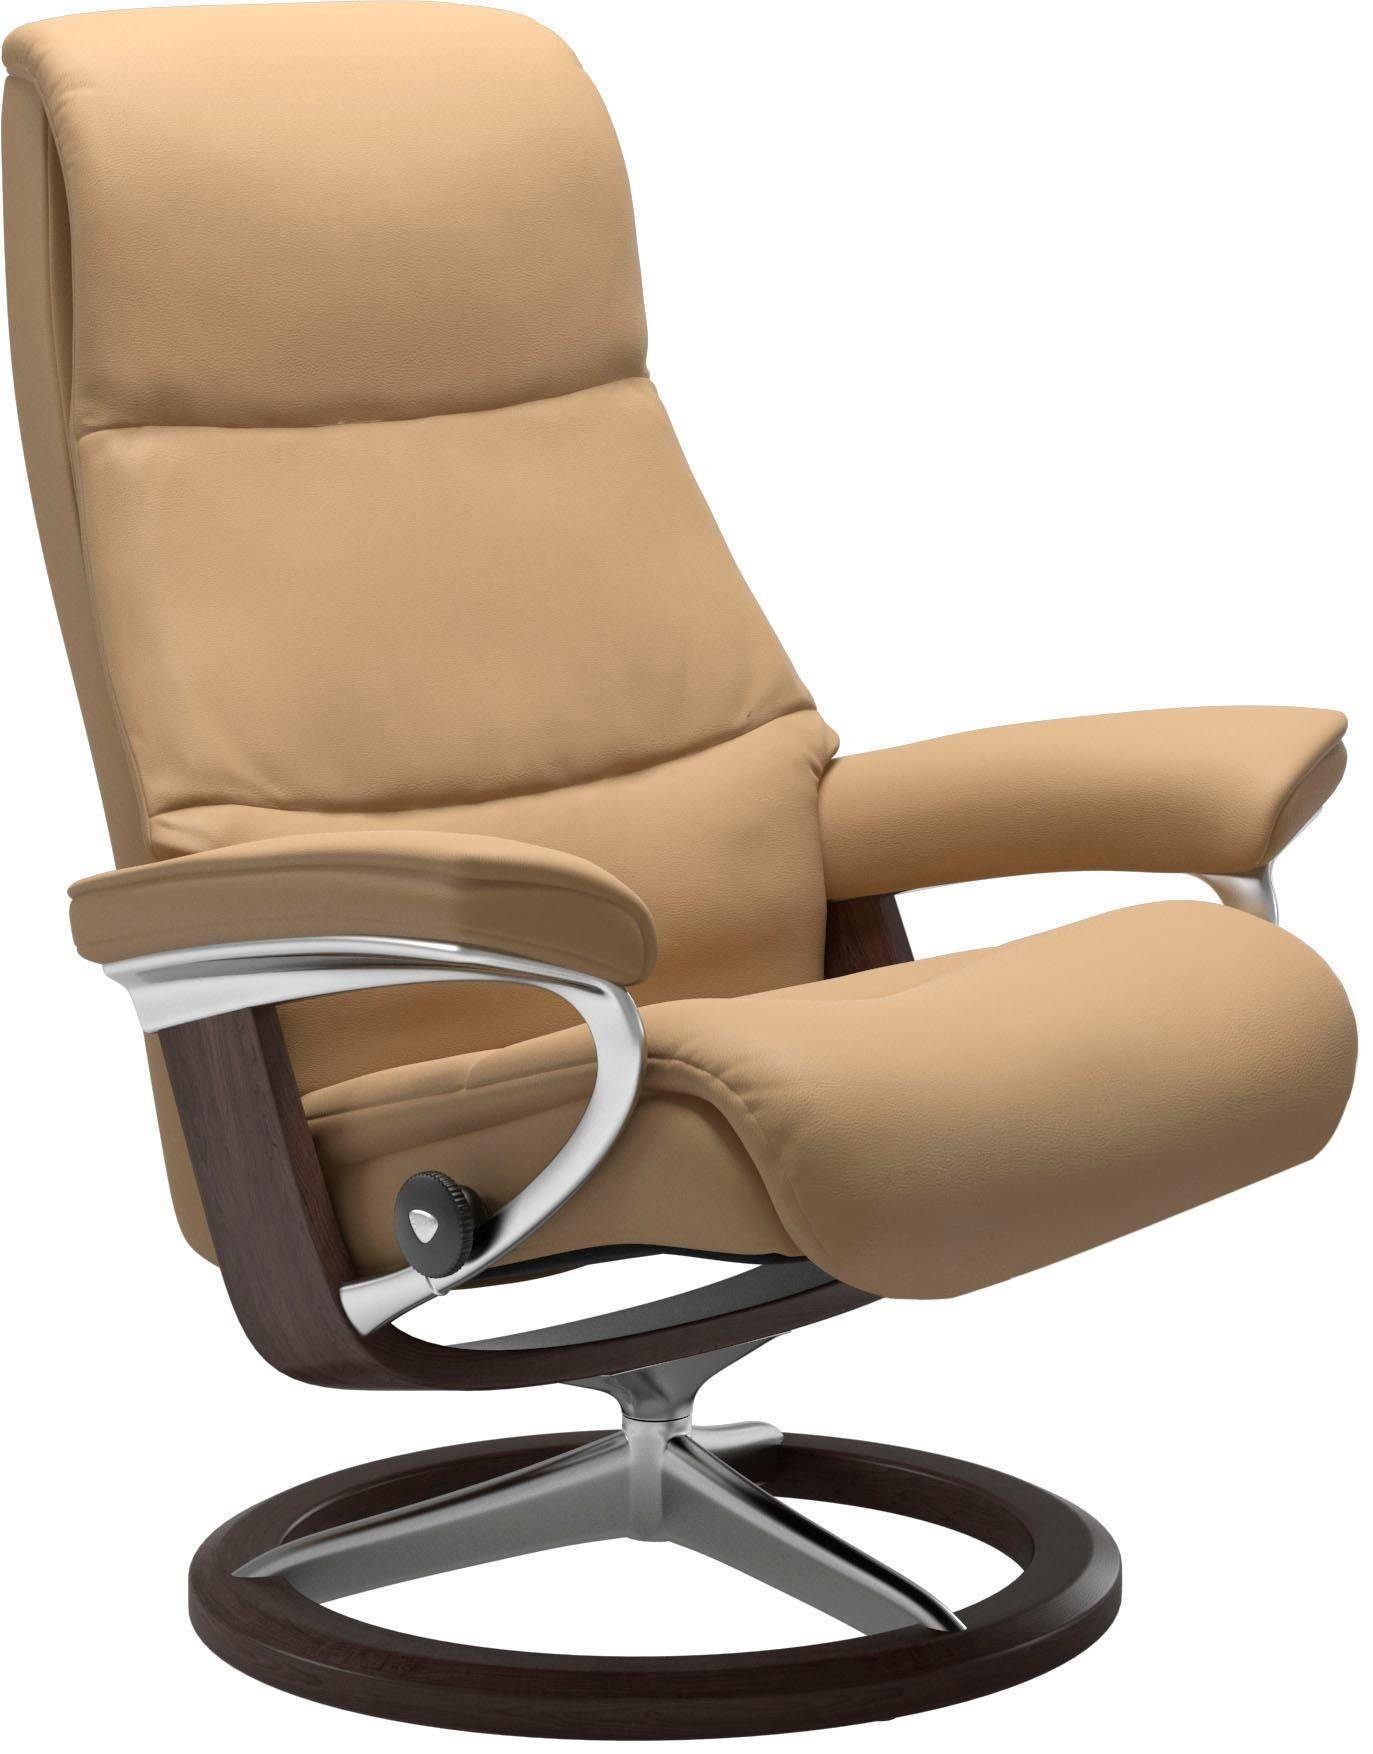 Base, L,Gestell Größe Wenge View, mit Stressless® Relaxsessel Signature